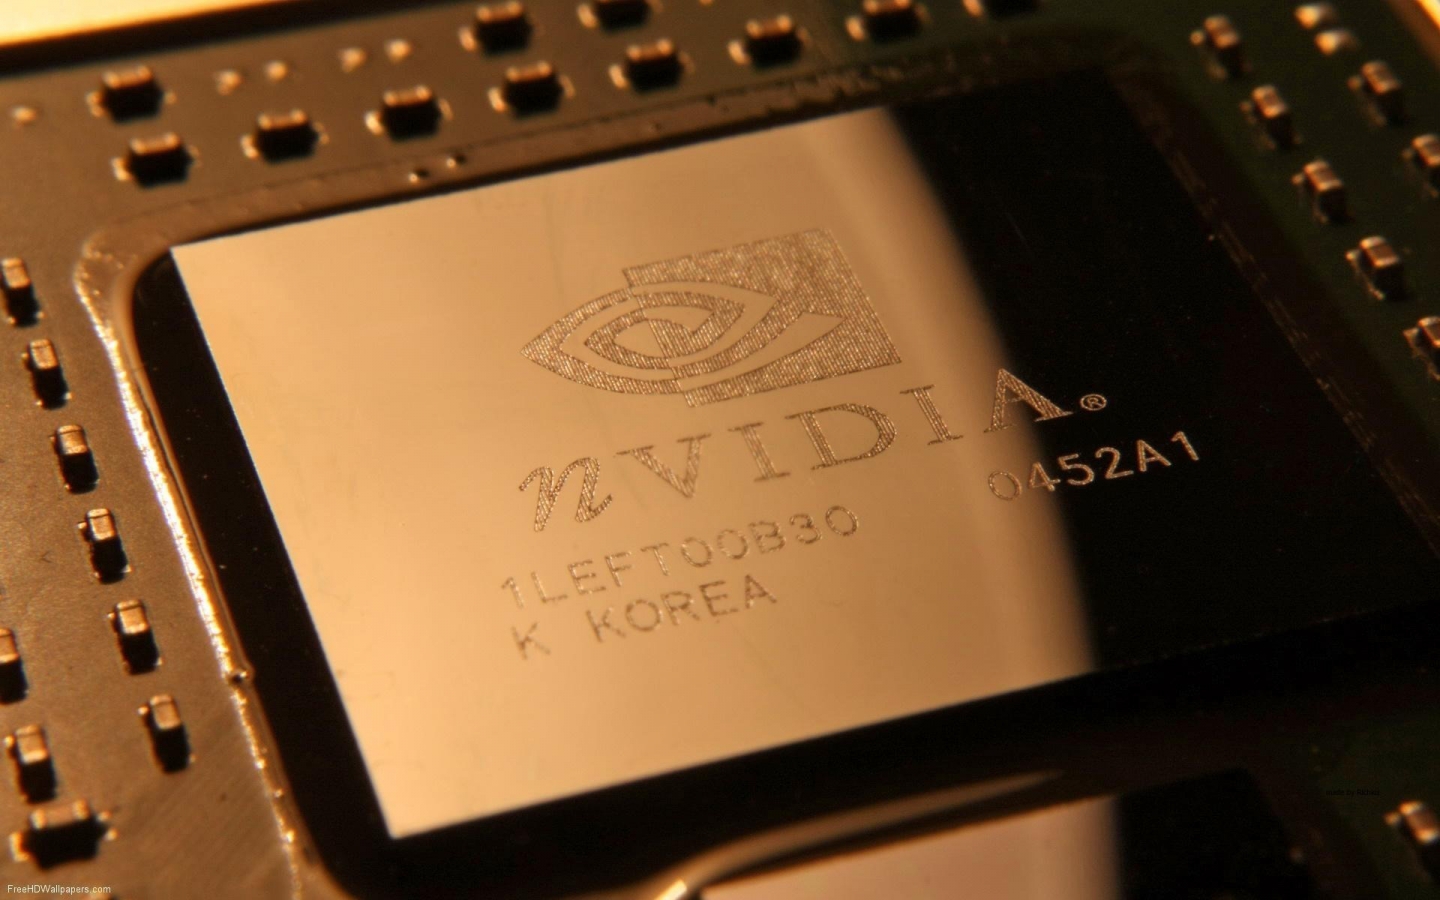 nVIdia Chipset for 1440 x 900 widescreen resolution